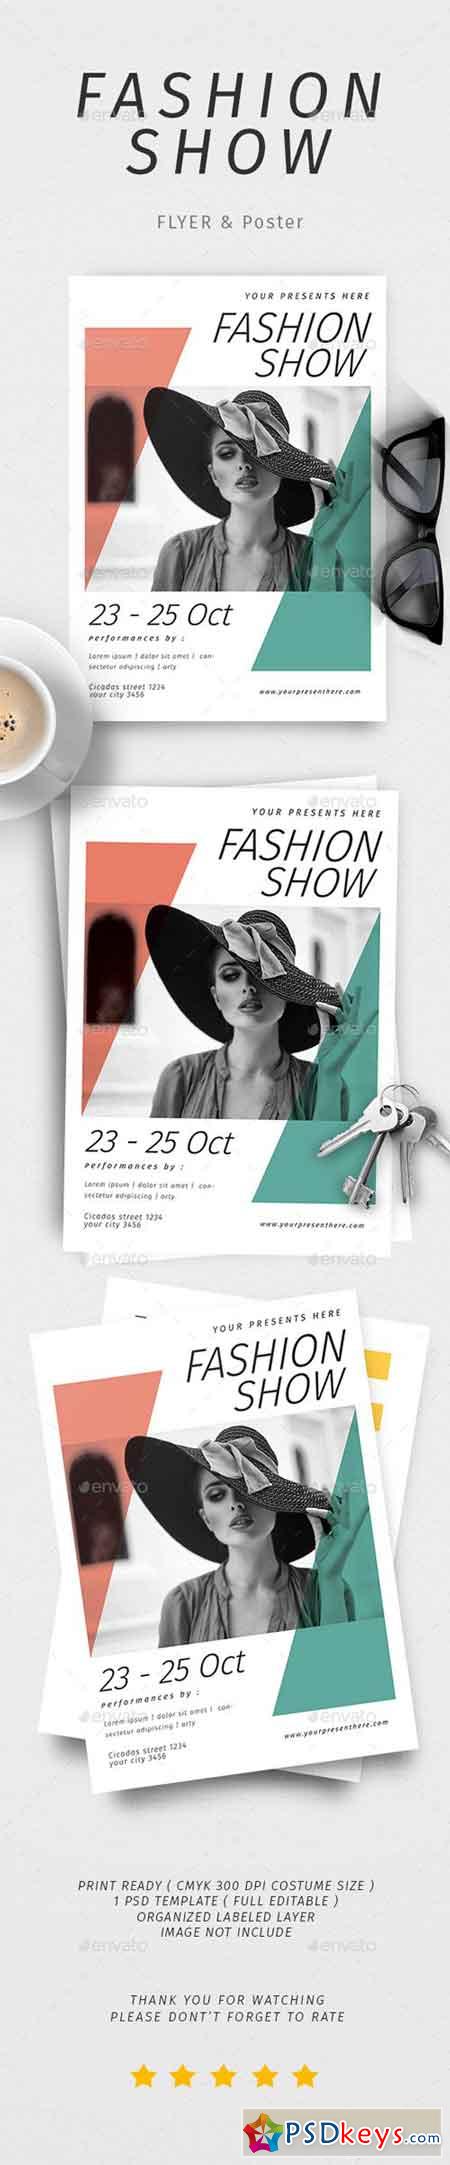 Fashion Show Poster & Flyer 20602753